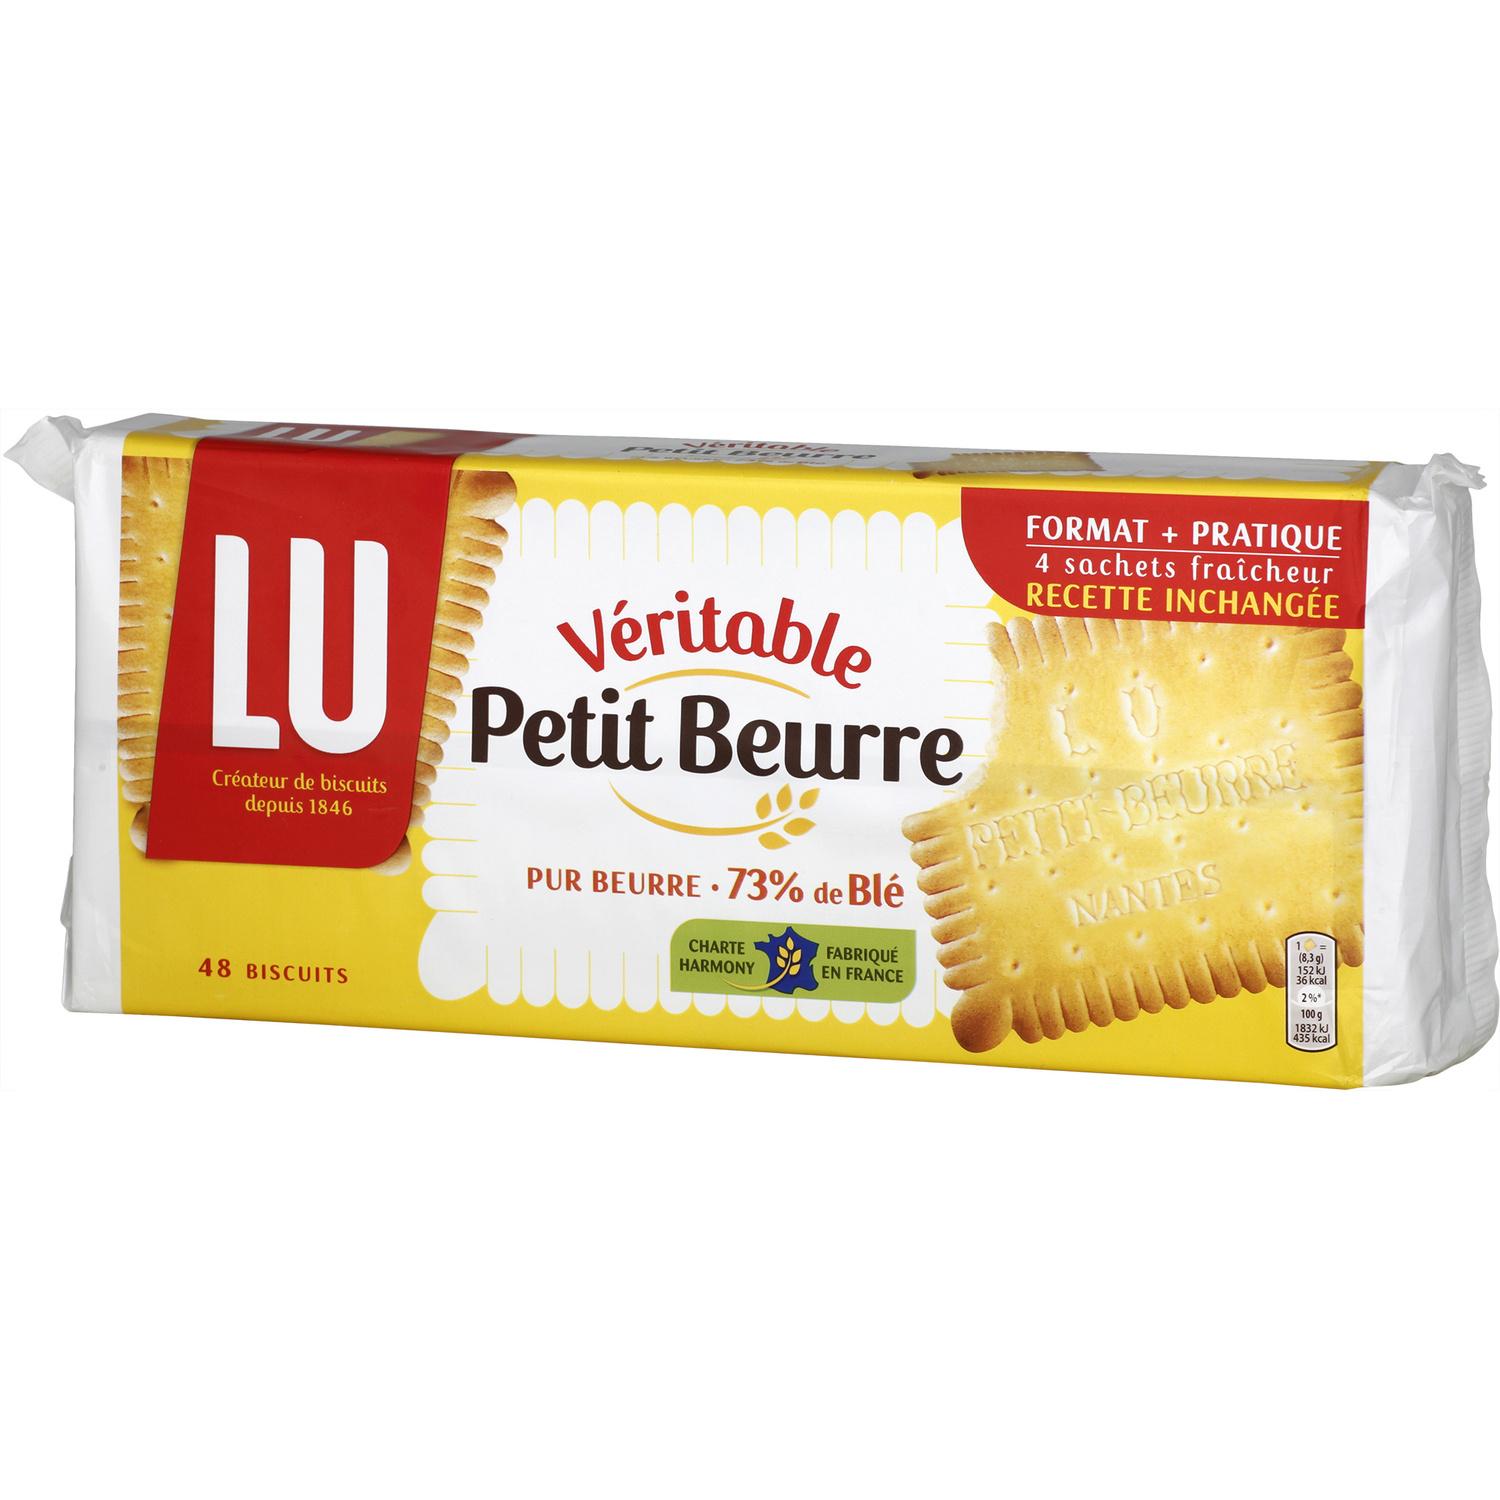 LU Biscuits LU Cookies, Pure Butter Biscuits, Le Petit Beurre, 7.05 oz, 6  pk,  price tracker / tracking,  price history charts,   price watches,  price drop alerts